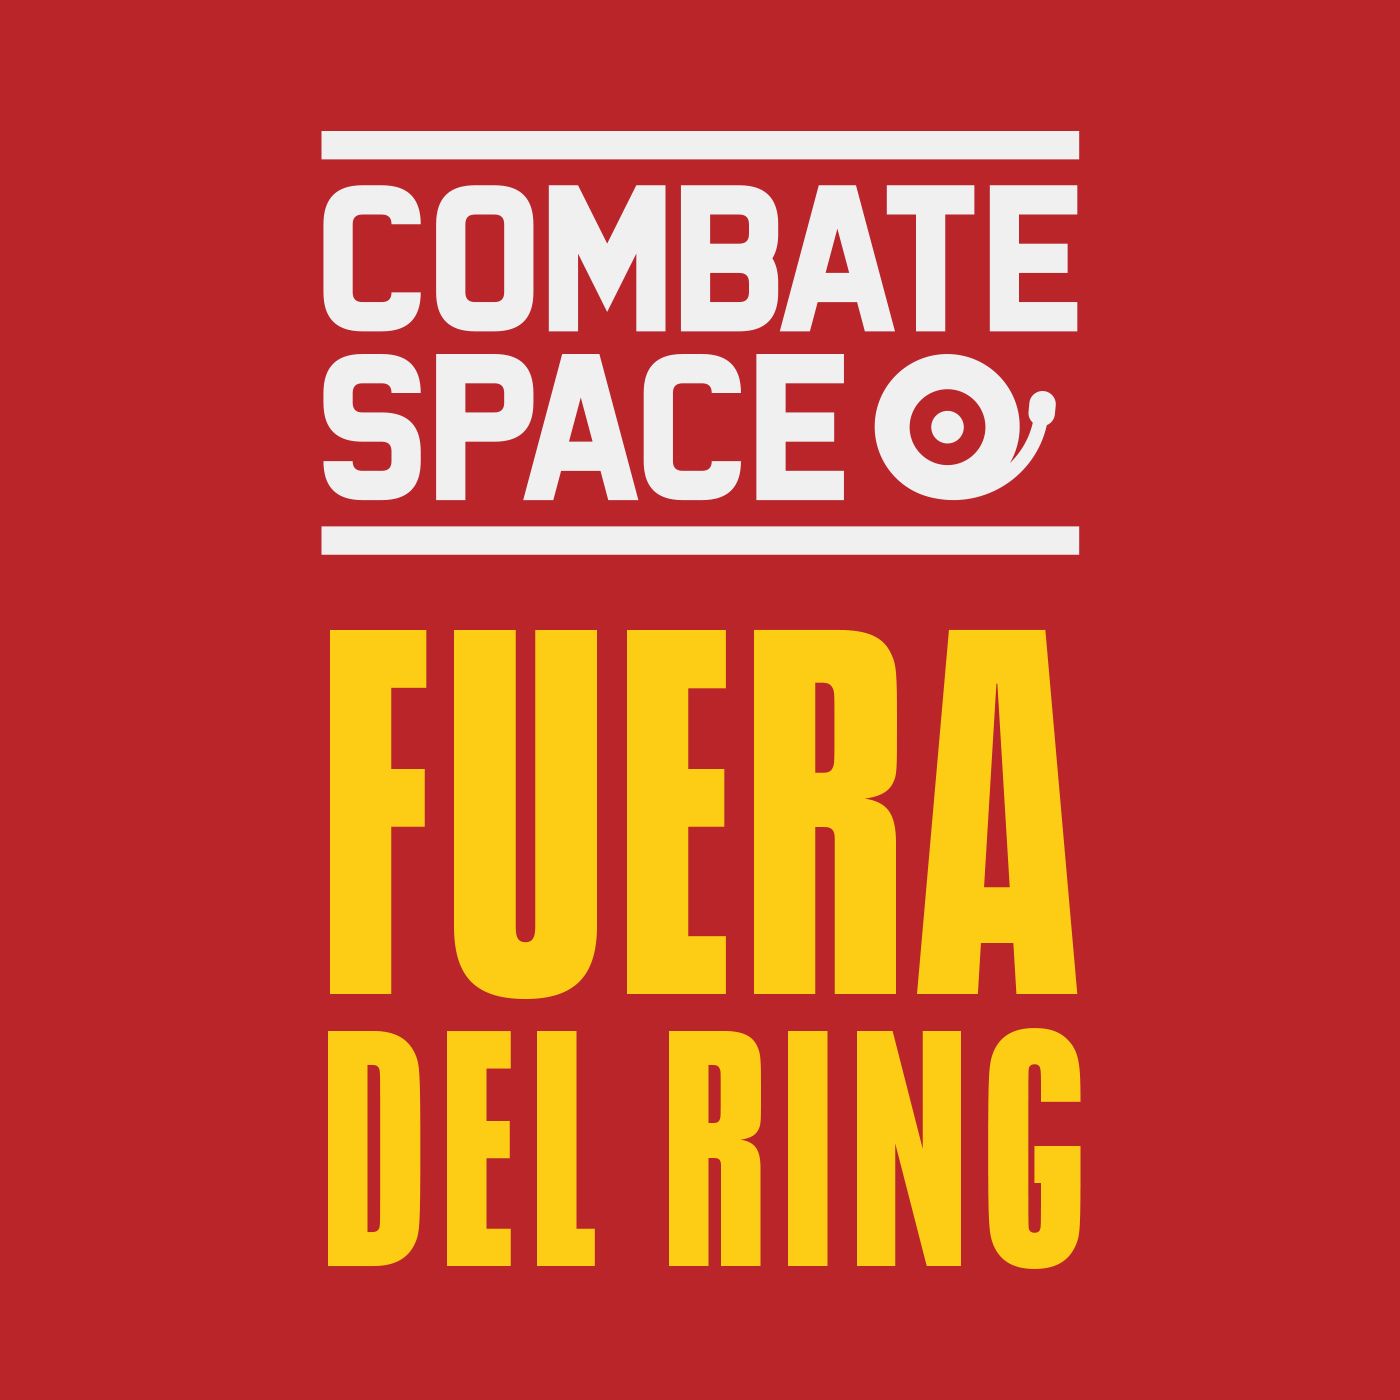 TEASER COMBATE SPACE FUERA DEL RING